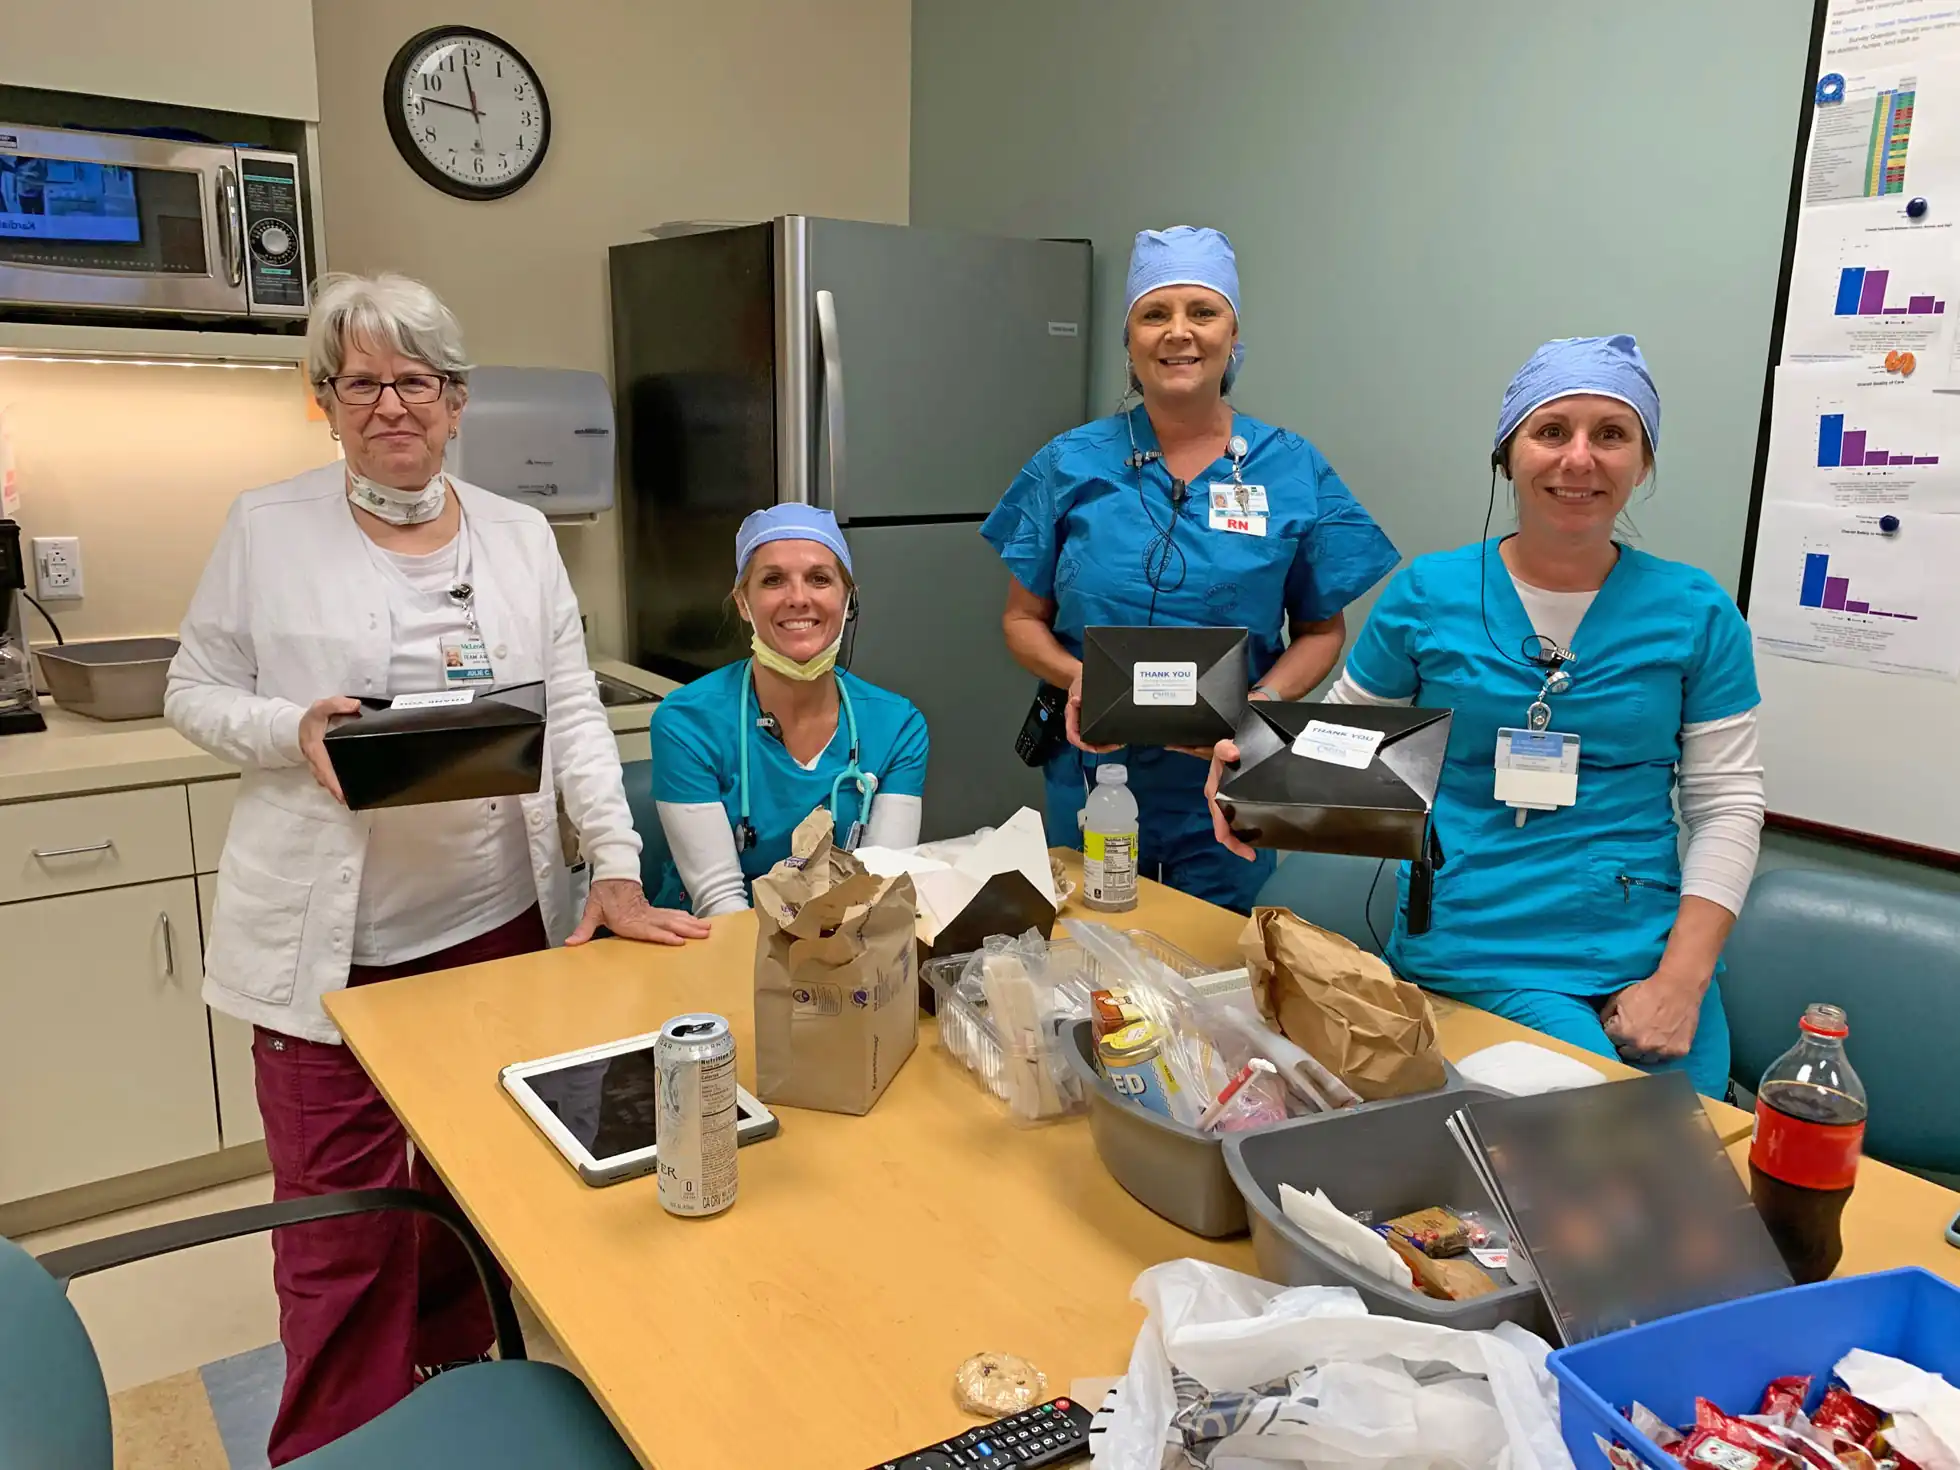 Capital Cares provided lunch for the employees of McLeod Seacoast Hospital